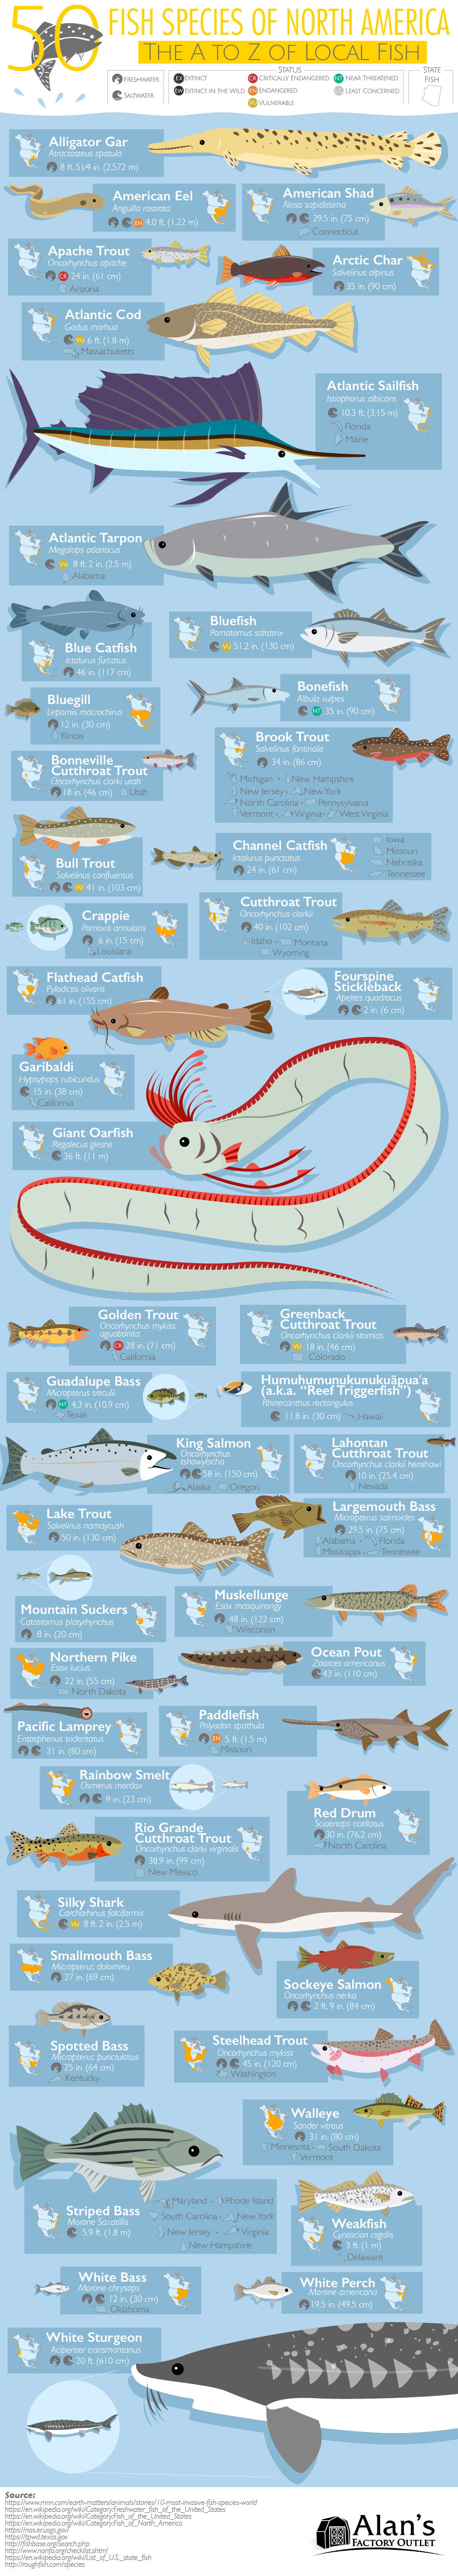 50 Fish Species of North America: The A to Z of Local Fish #Infographic